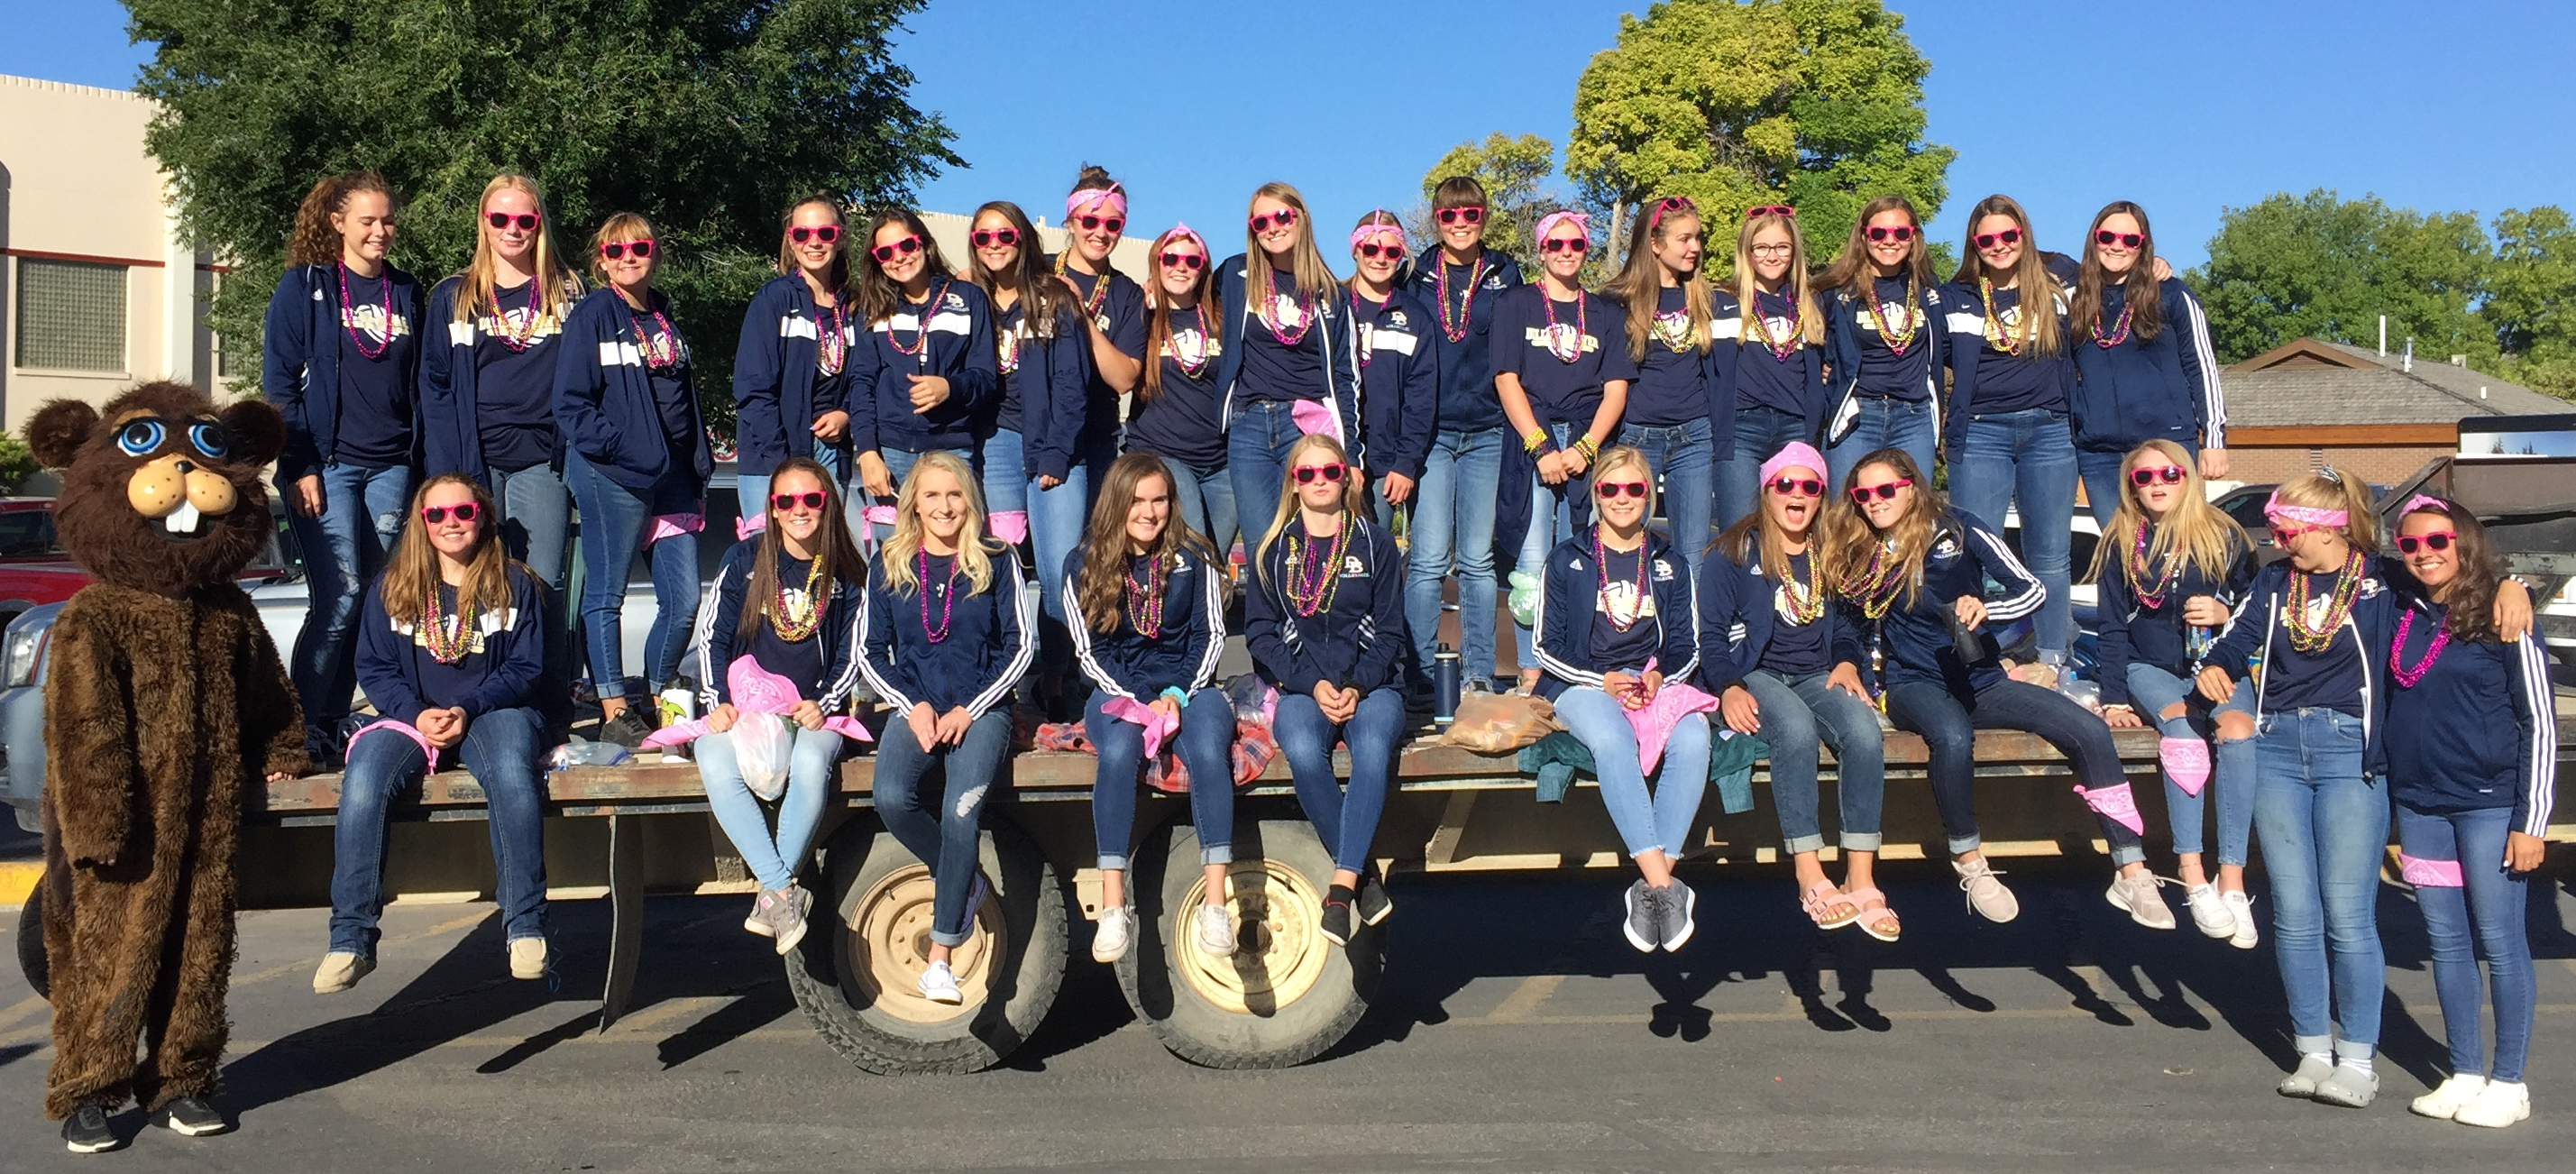 A photo of the volleyball team decked out in pink for the Labor Day parade in September 2018